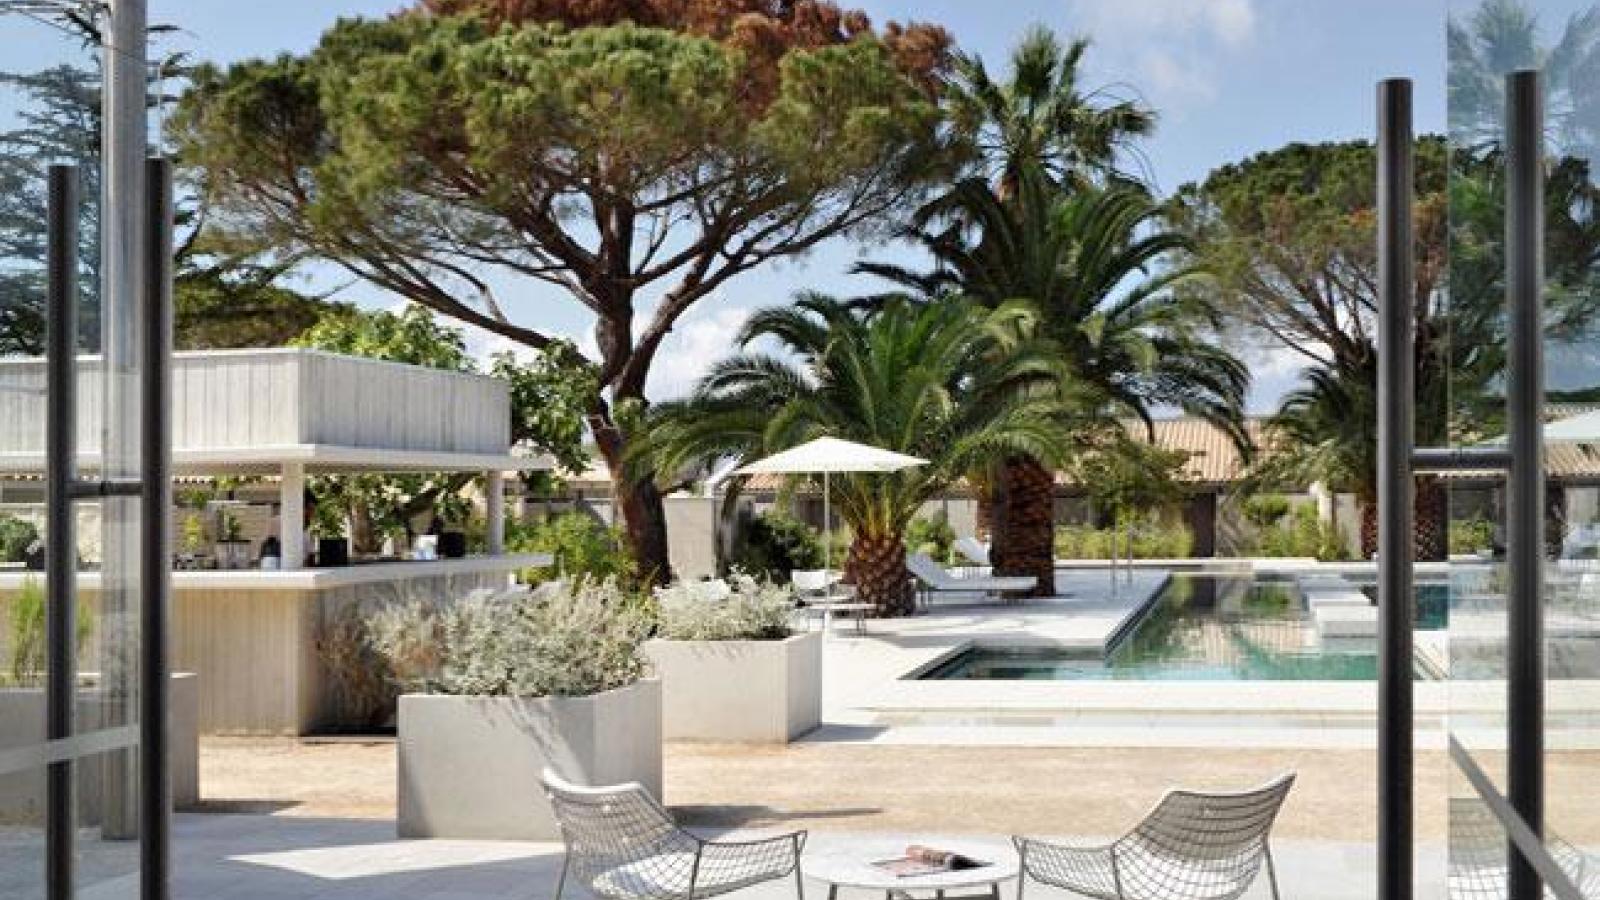 Hotel Sezz Saint Tropez re-opening: plenitude and delight